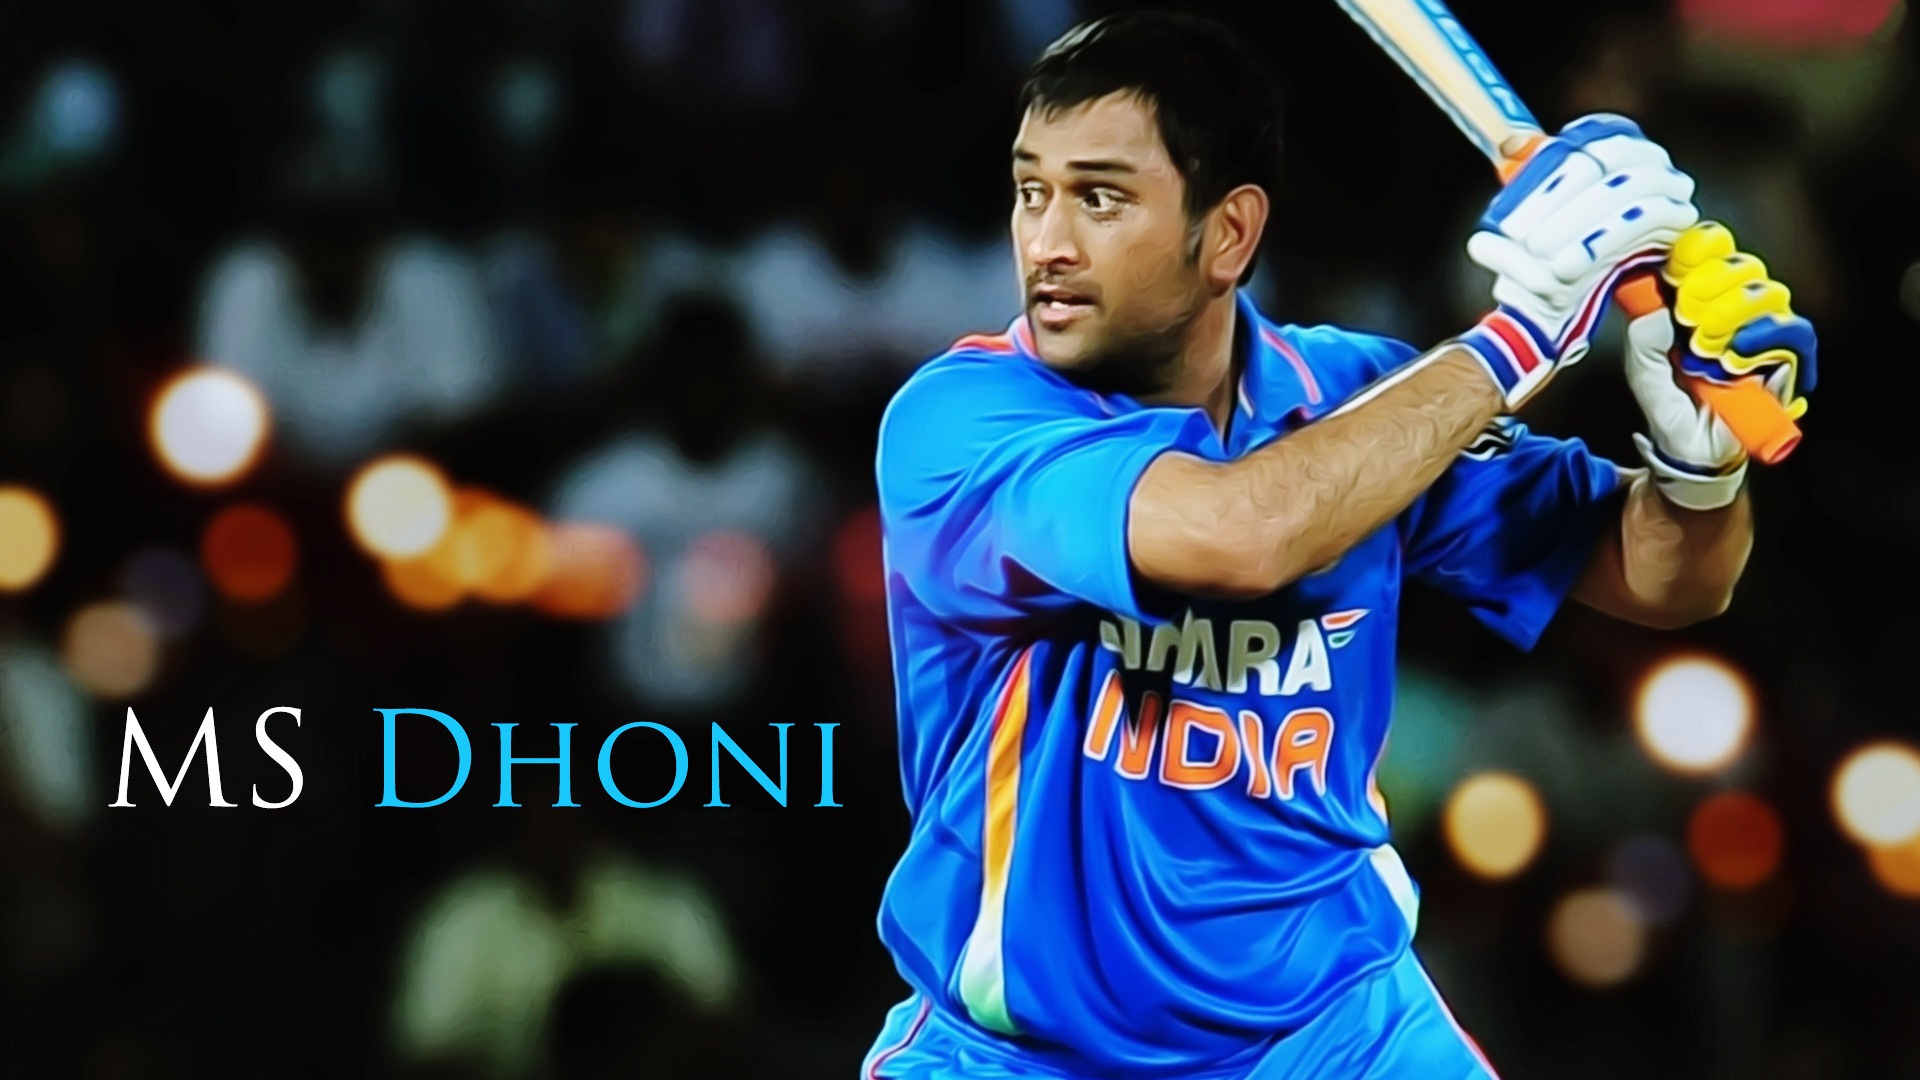 Dhoni PC Wallpapers - Wallpaper Cave